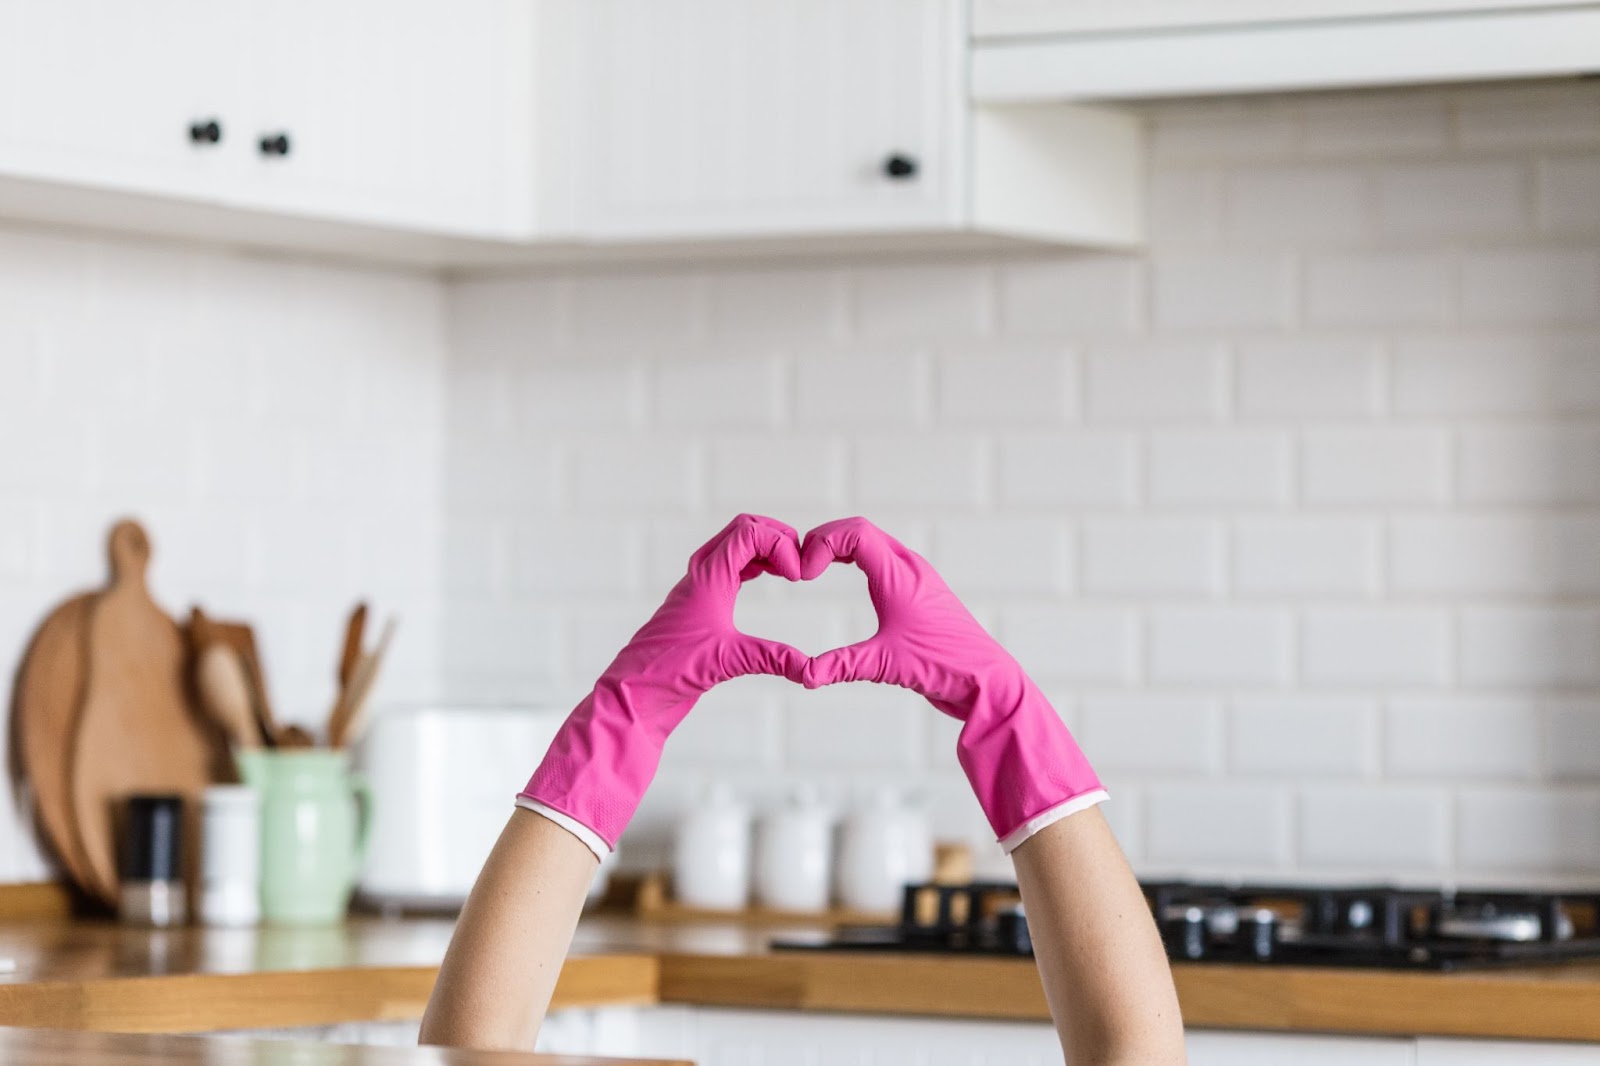 heart-shaped hands with gloves